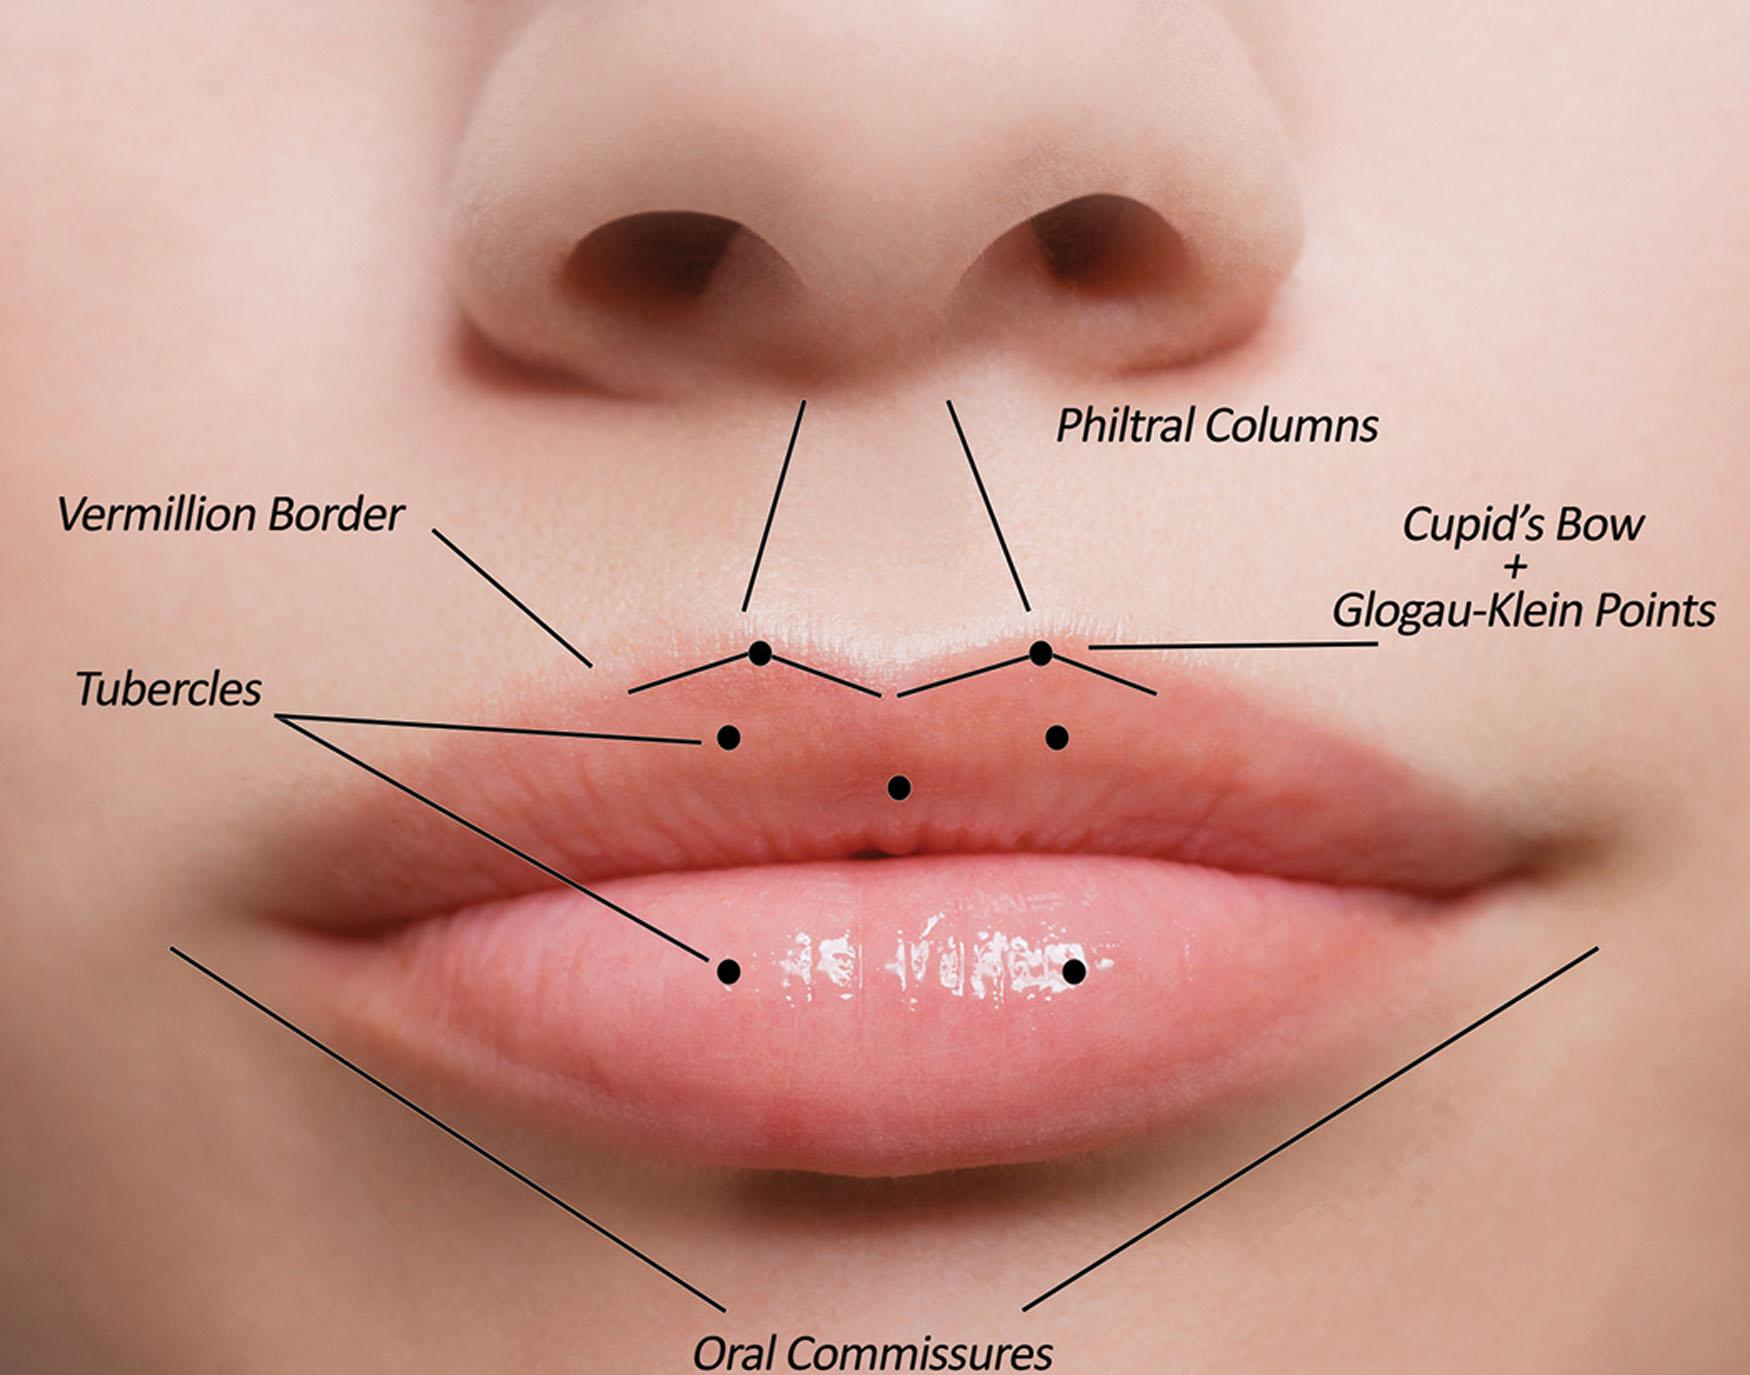 Fig. 10.54, Some important anatomic components of youthful and aesthetic lips and perioral region.